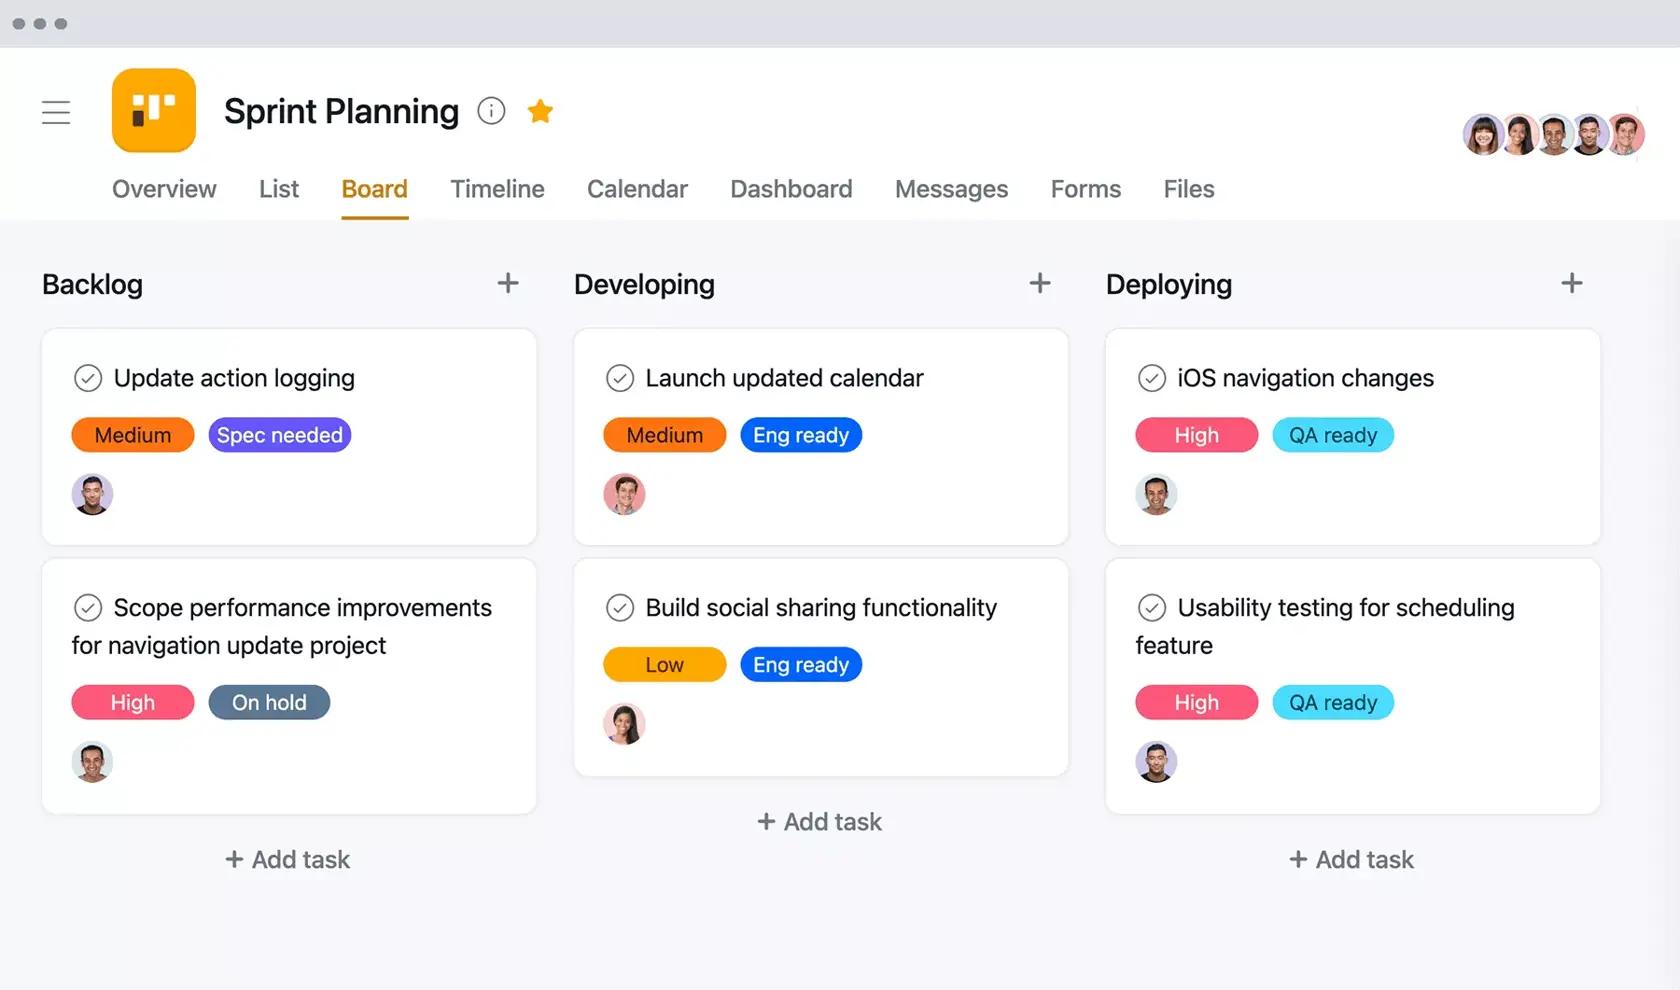 [Old Product UI] Sprint planning in Asana - Sprint backlog project in a Kanban board view (Boards)